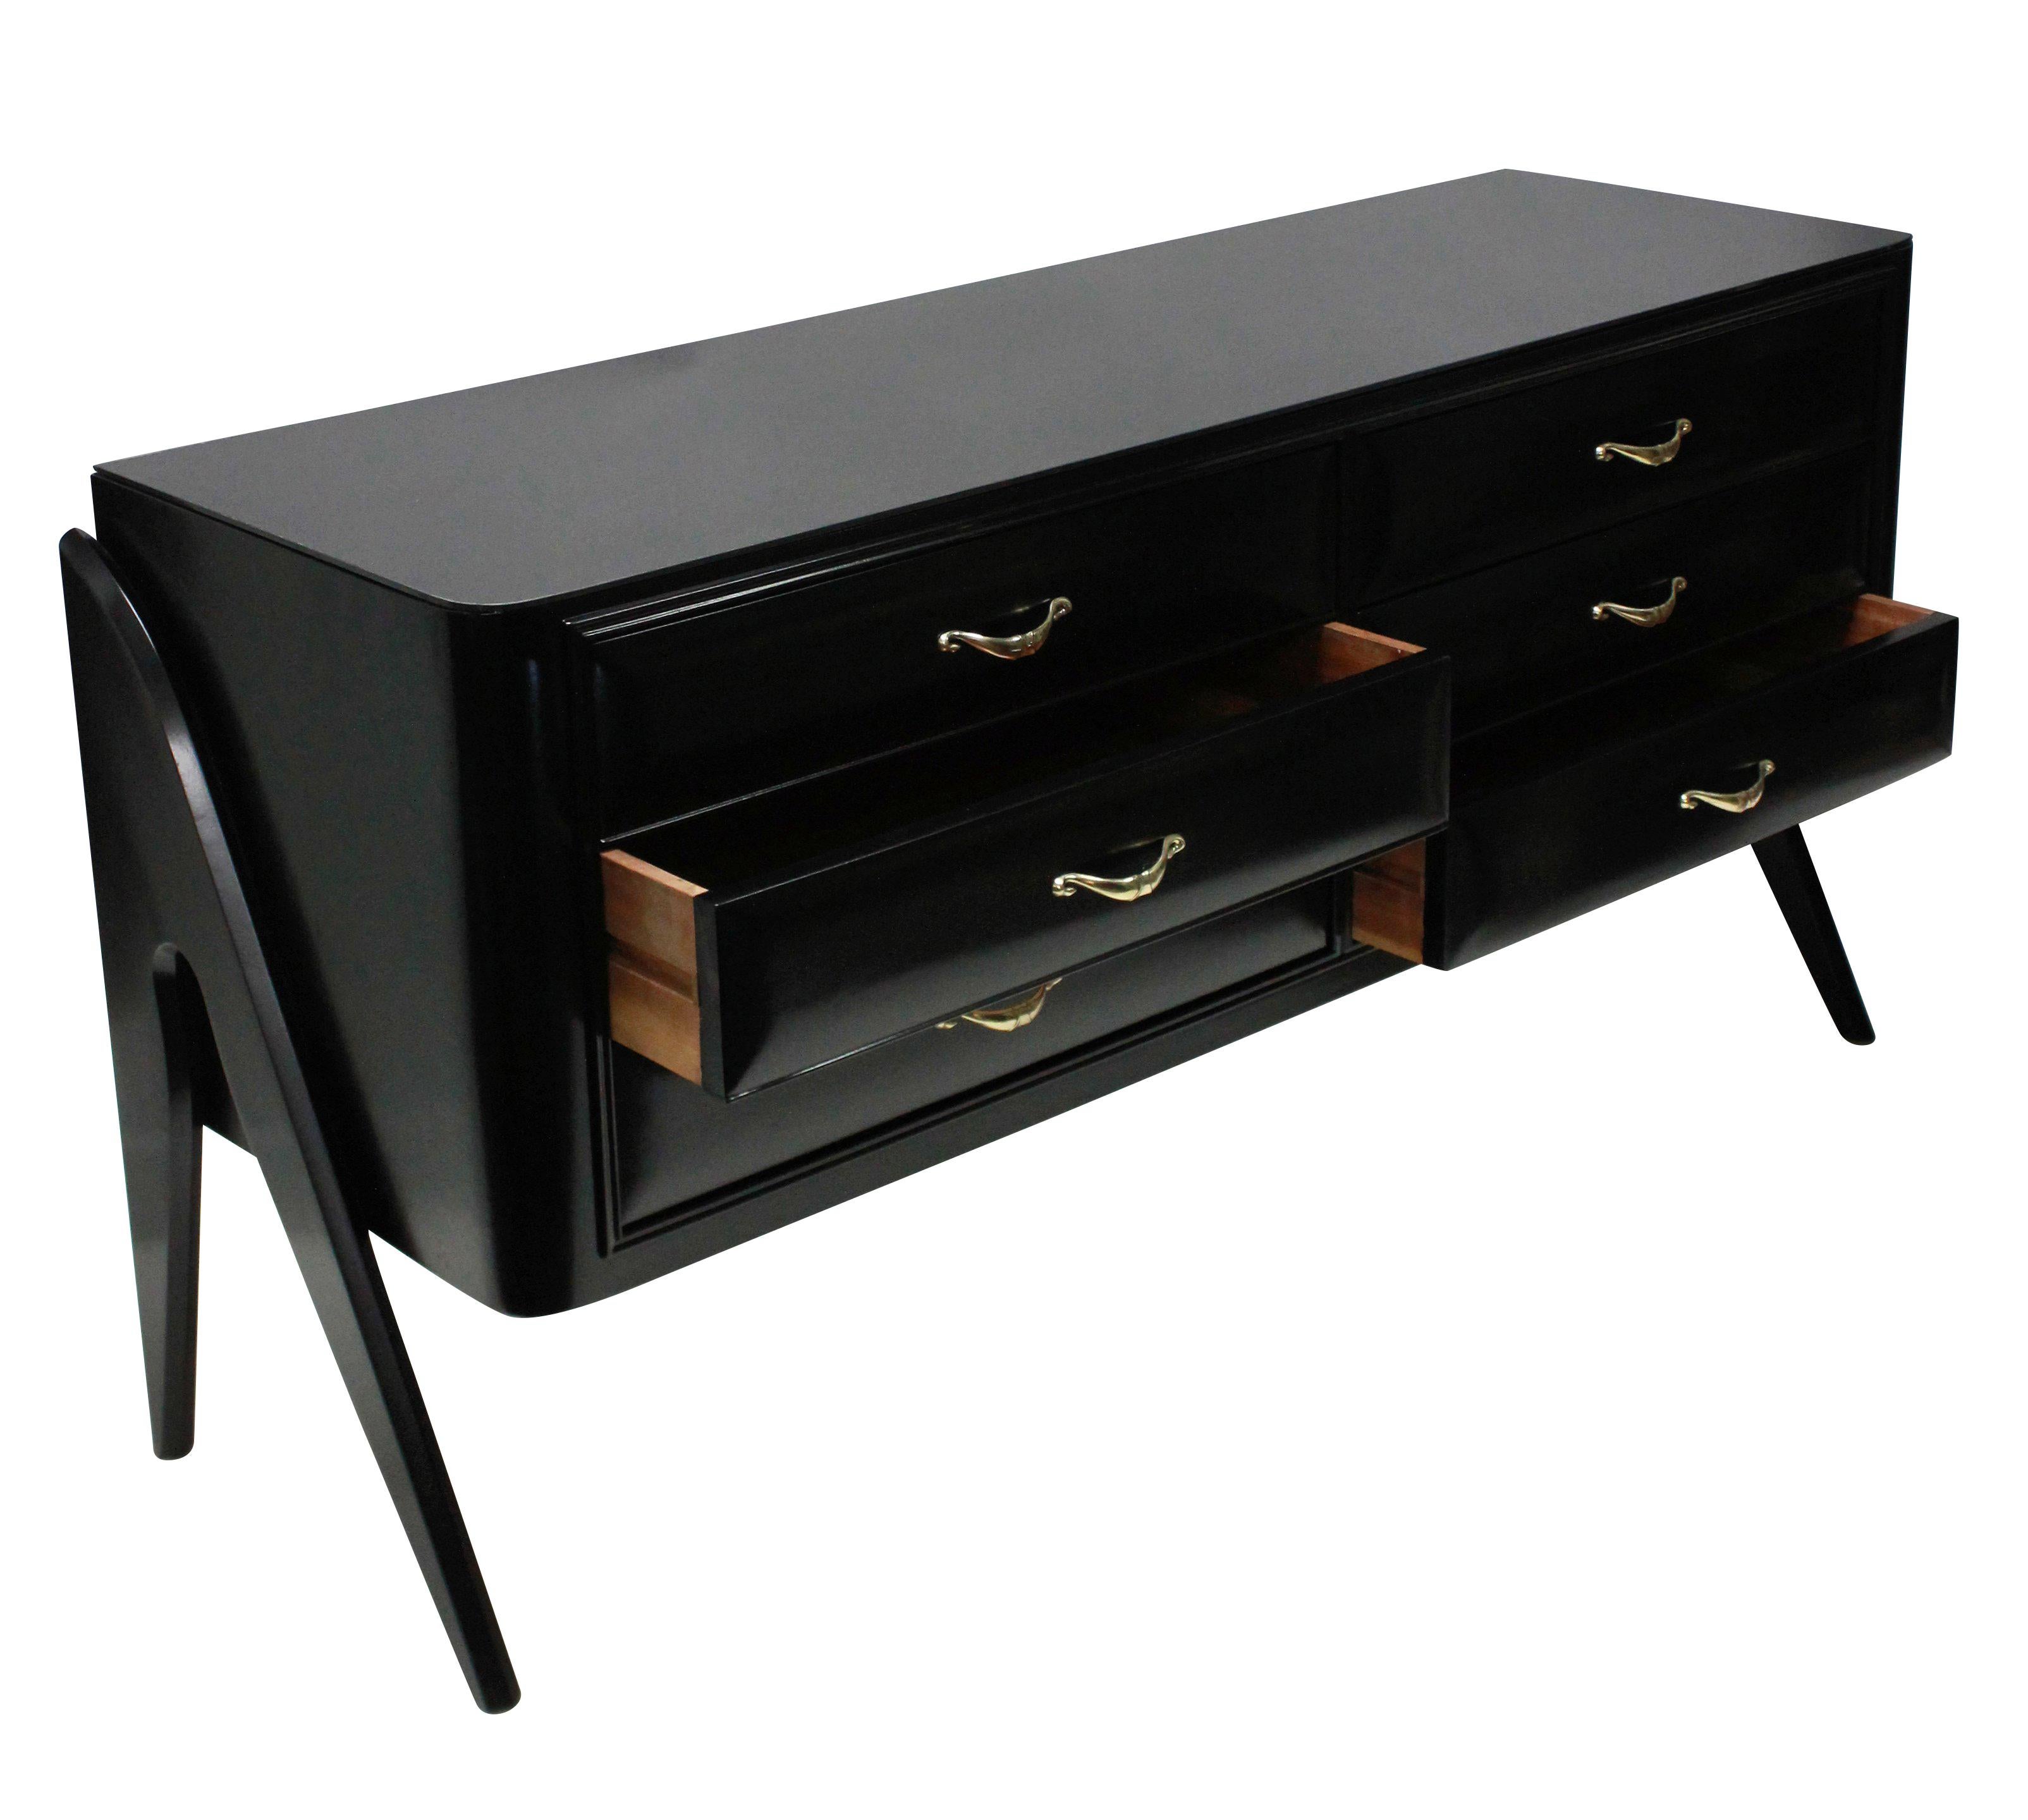 An Italian credenza in black satin finish lacquer, comprising six drawers with fine brass handles. The top of black glass and with architectural side panel legs.